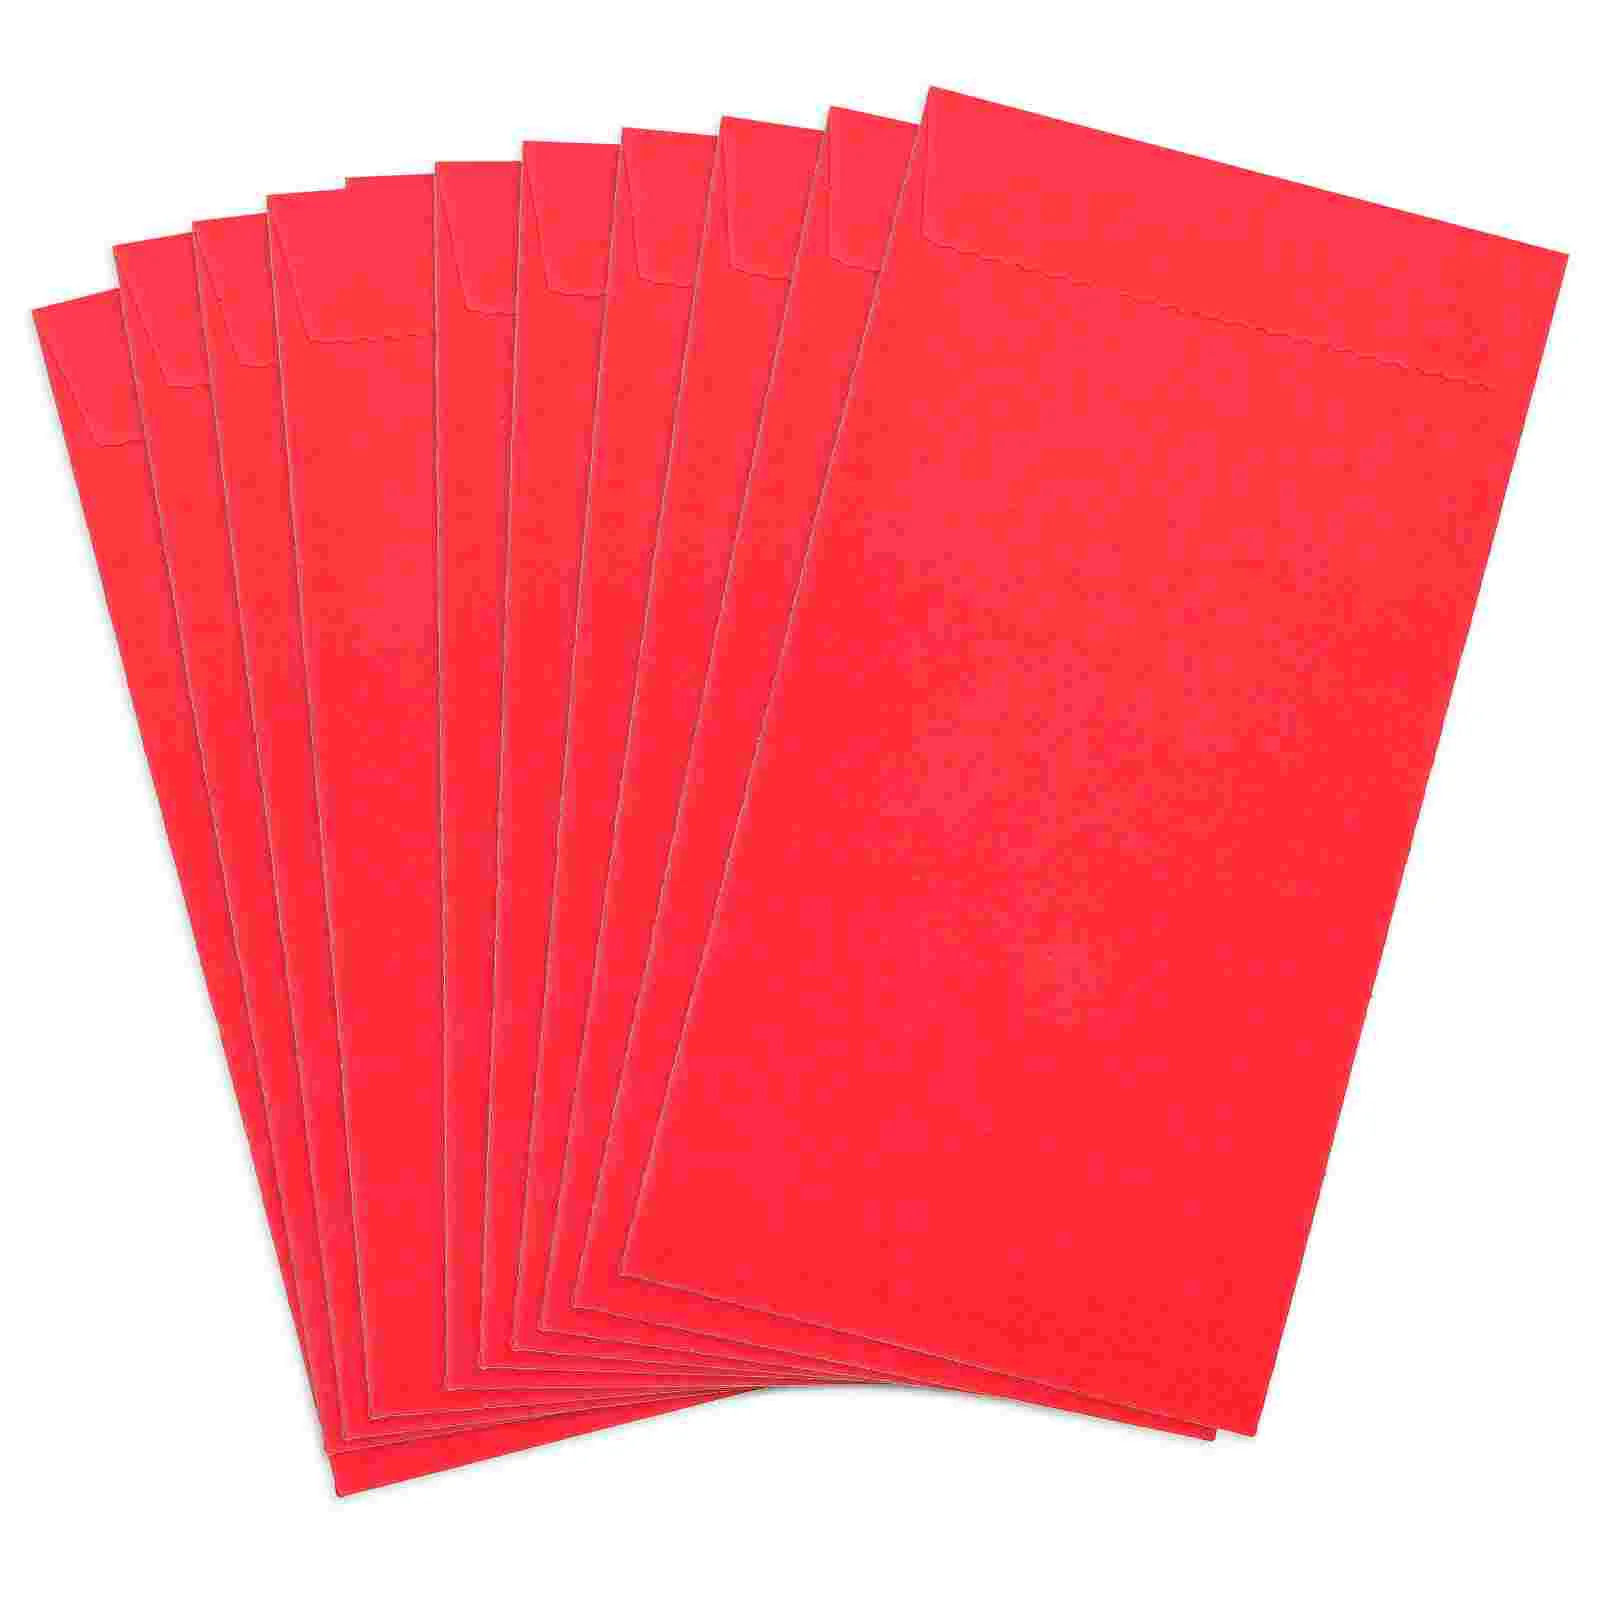 

20 Pcs Budget Cash Envelope Money Envelopes for Gifts Coin Chinese Red Tip Saving Challenge Style Savings